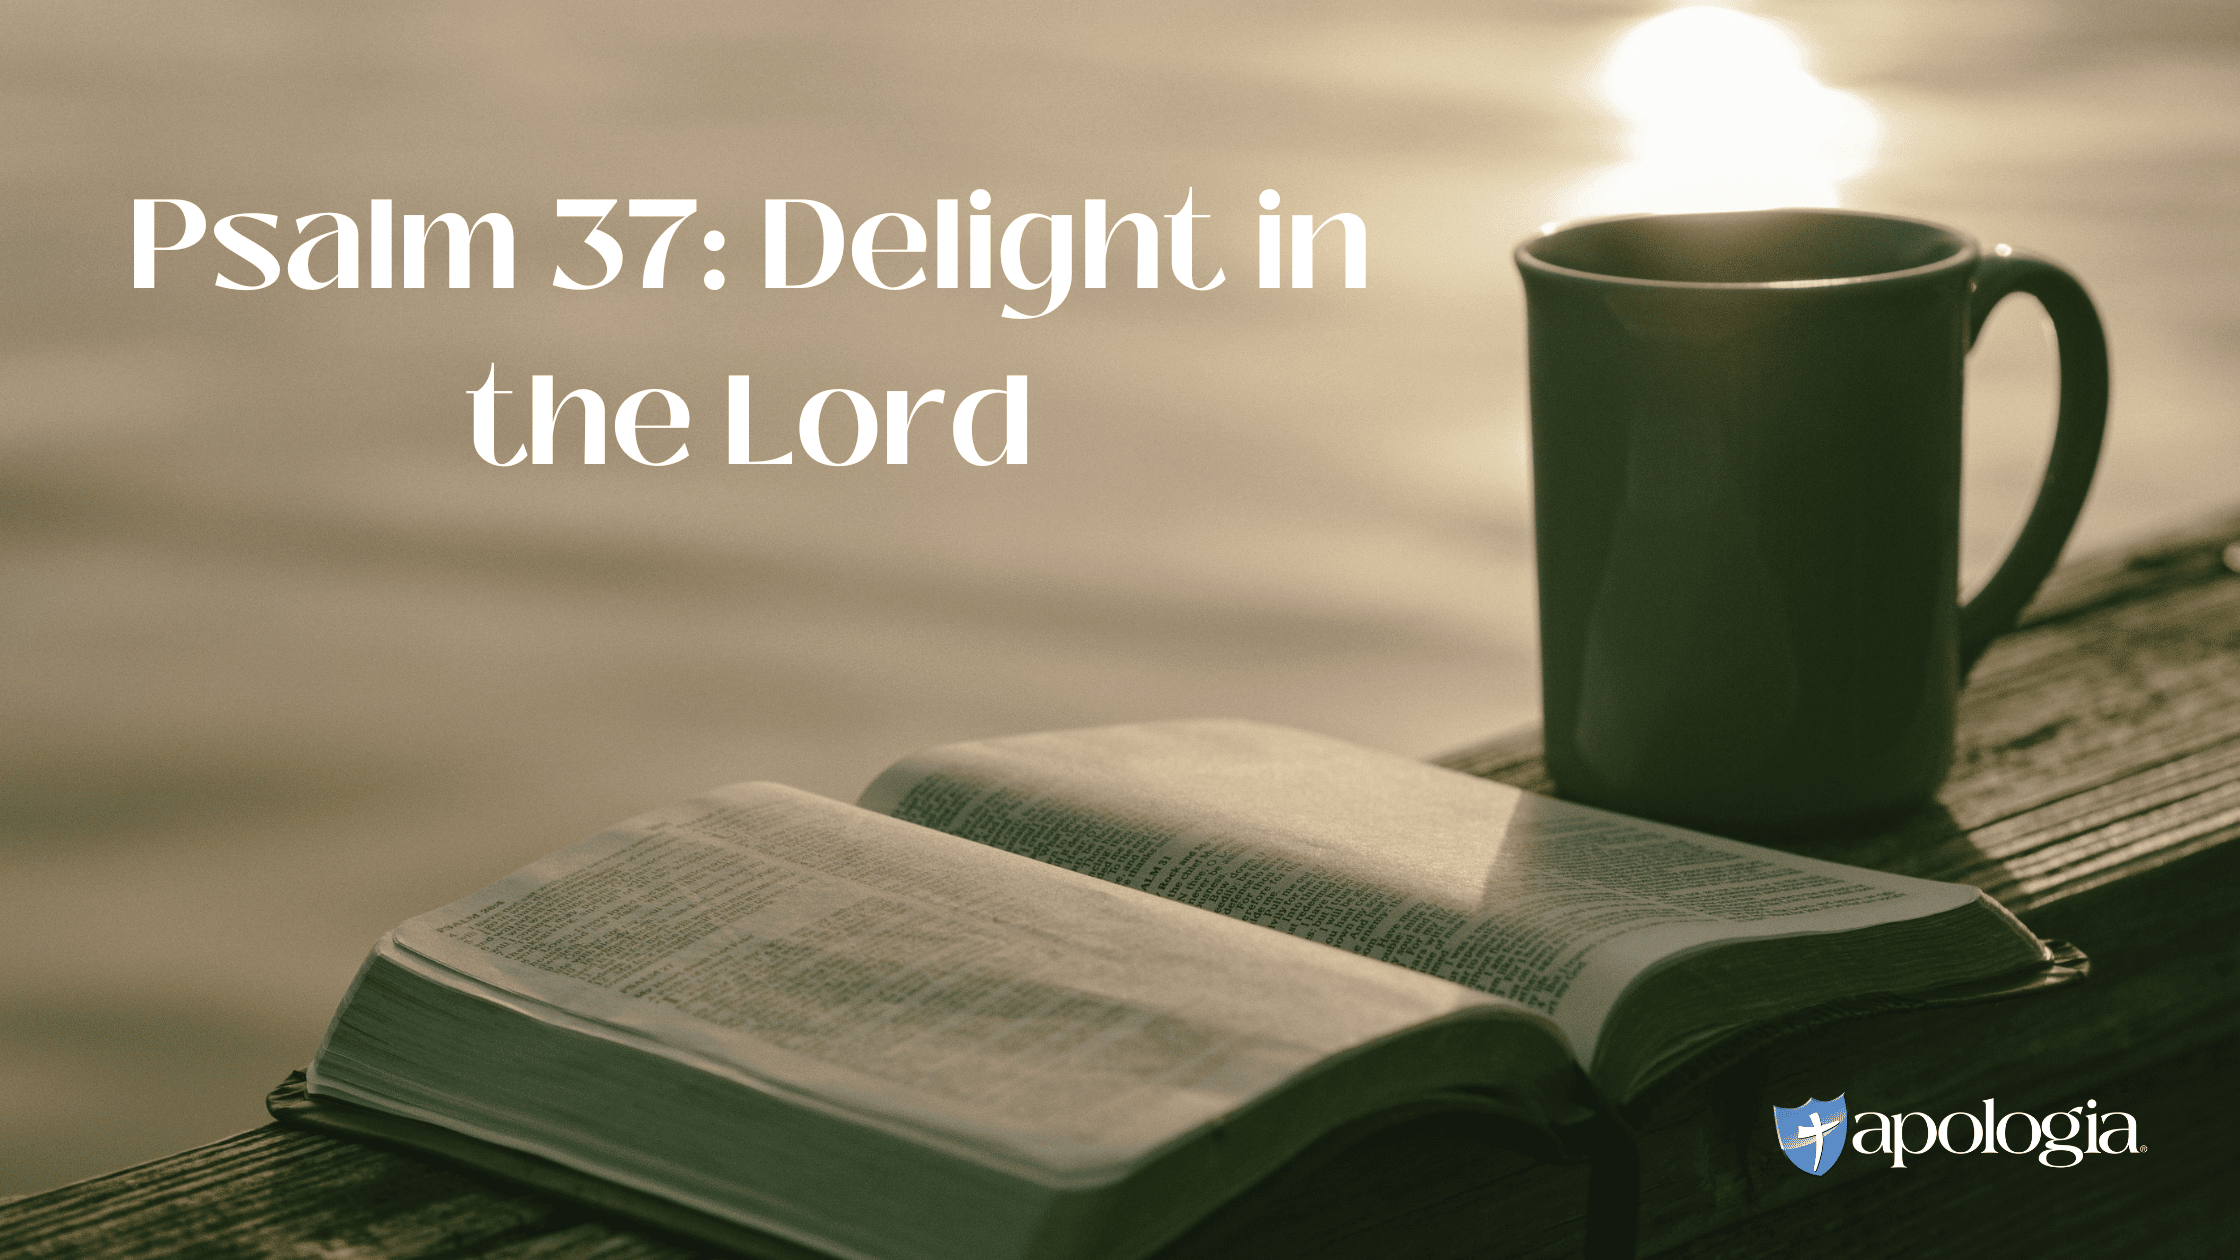 Psalm 37: Delight in the Lord